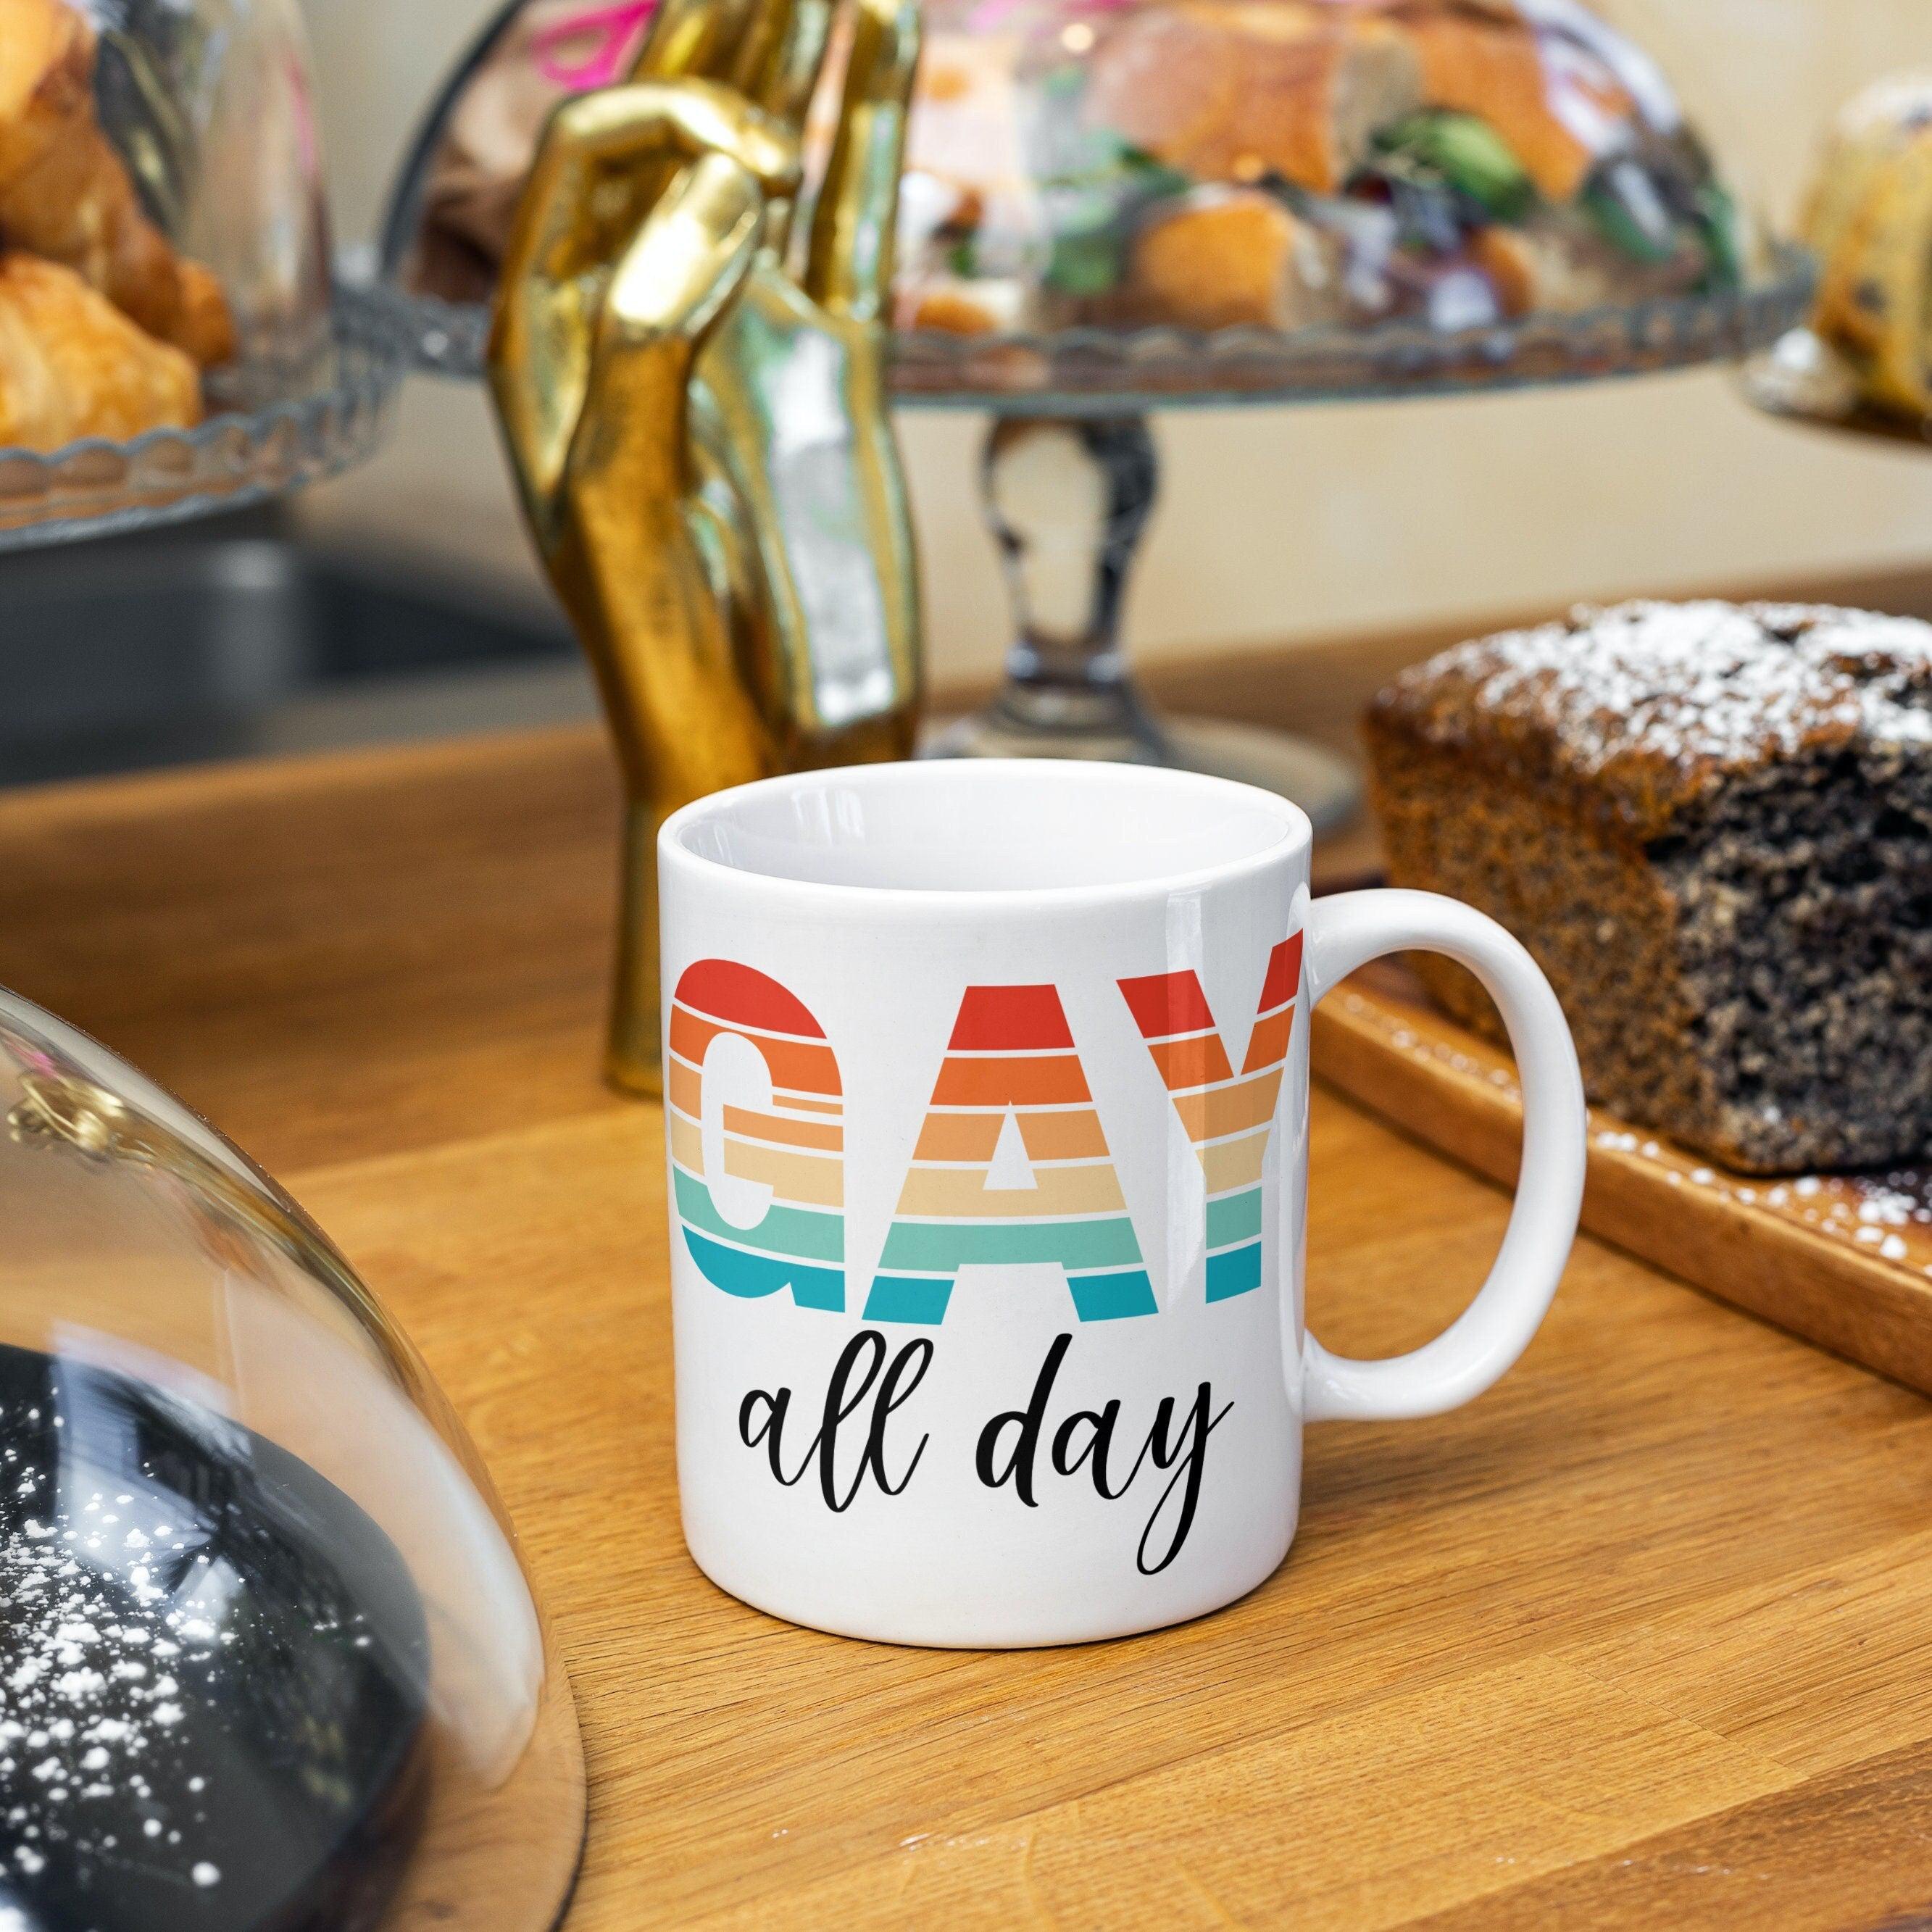 GAY All Day Coffee Mug - Funny PRIDE Coffee Cup for Work - Gift for LGBTQIA+ Friend - Pride Party Coffee Cup - Gay Pride Home Decor for Them